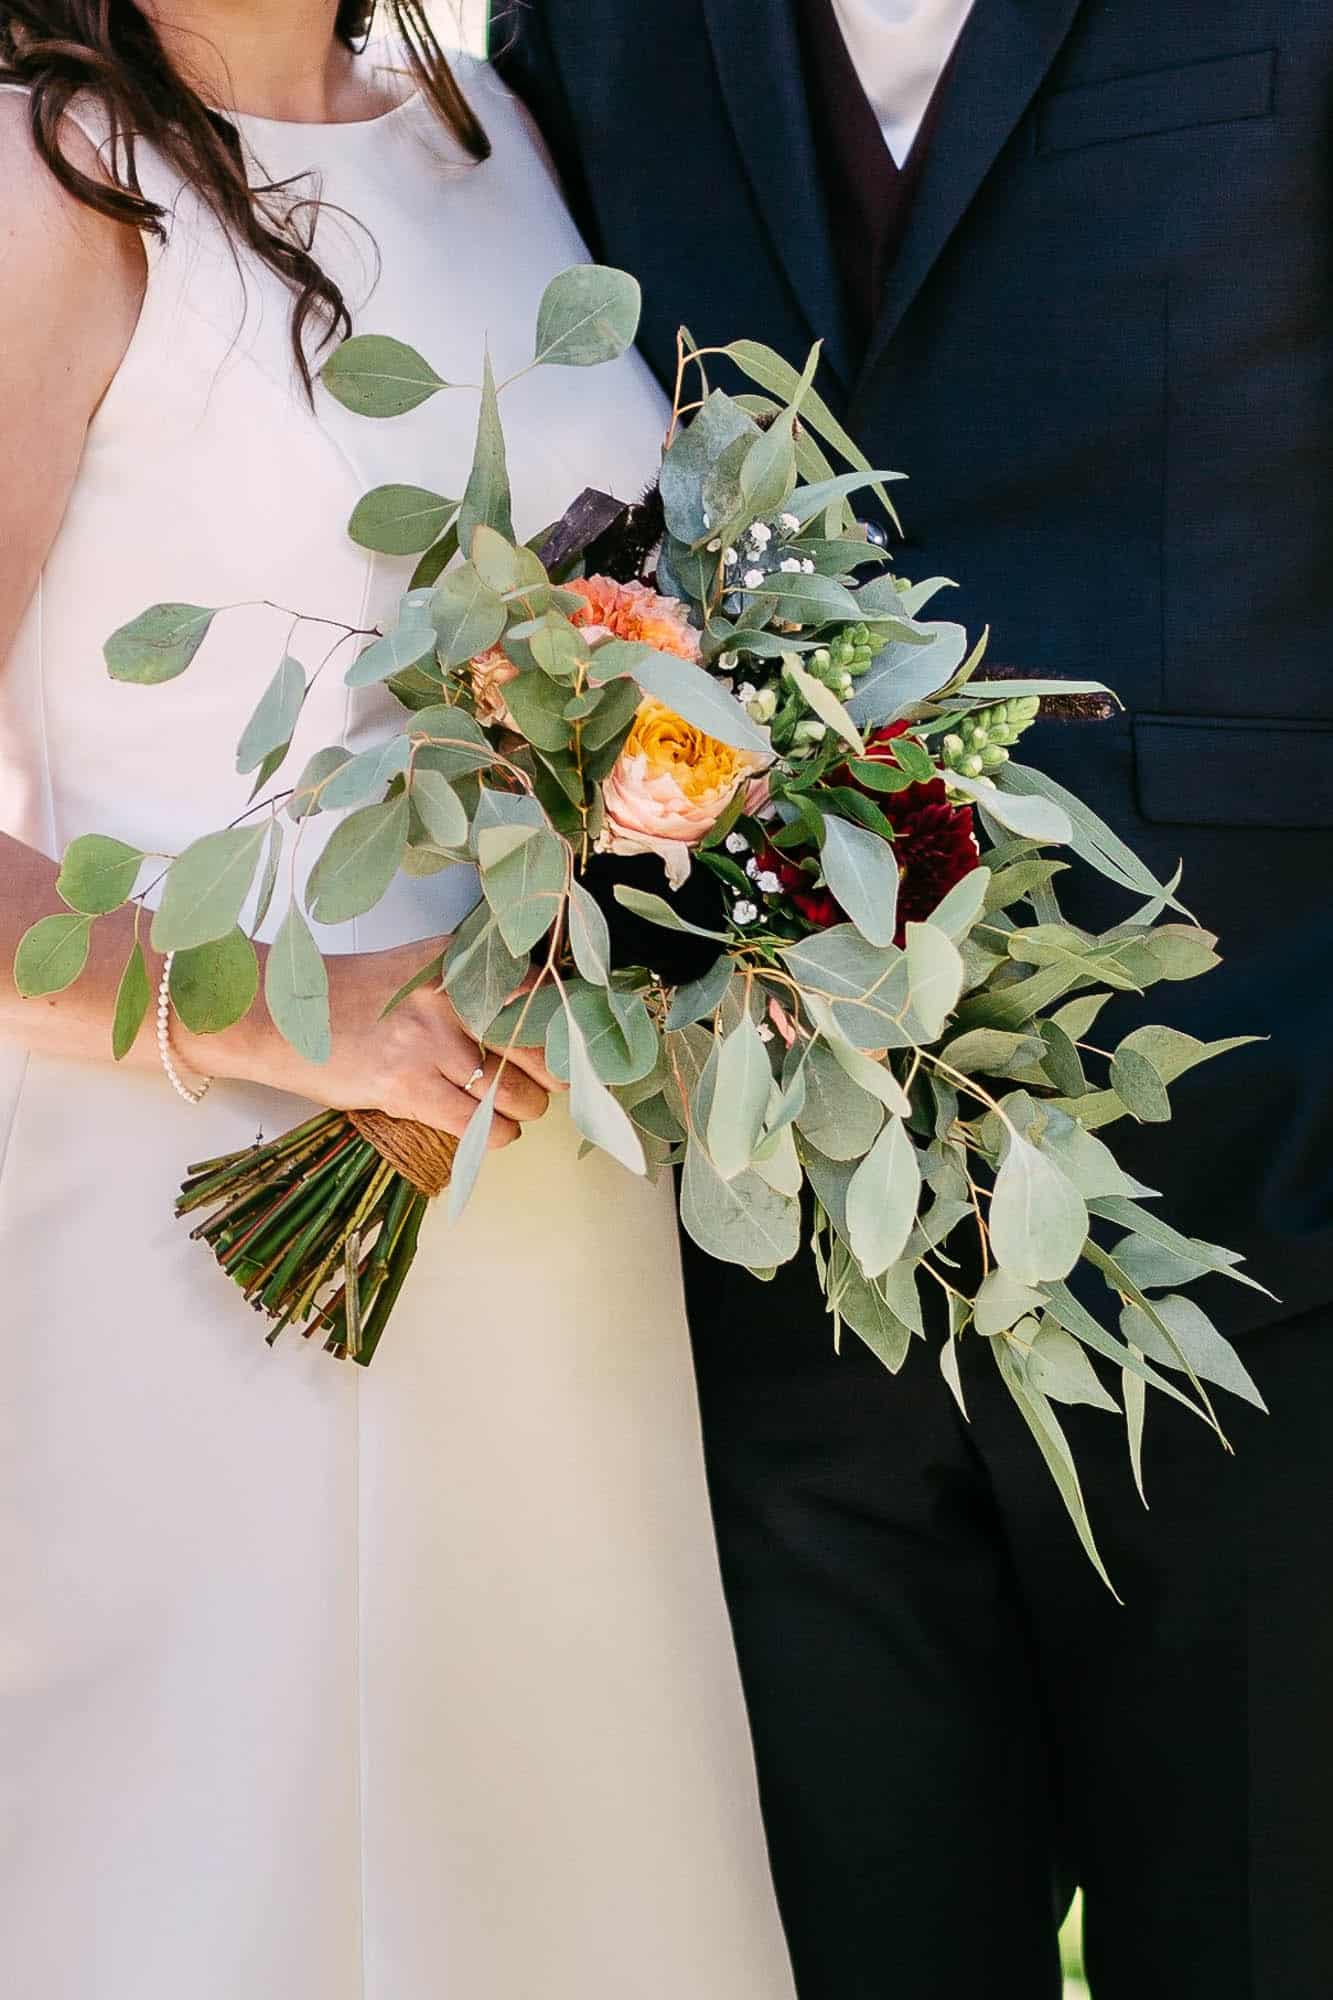 A bride and groom holding a wedding bouquet.